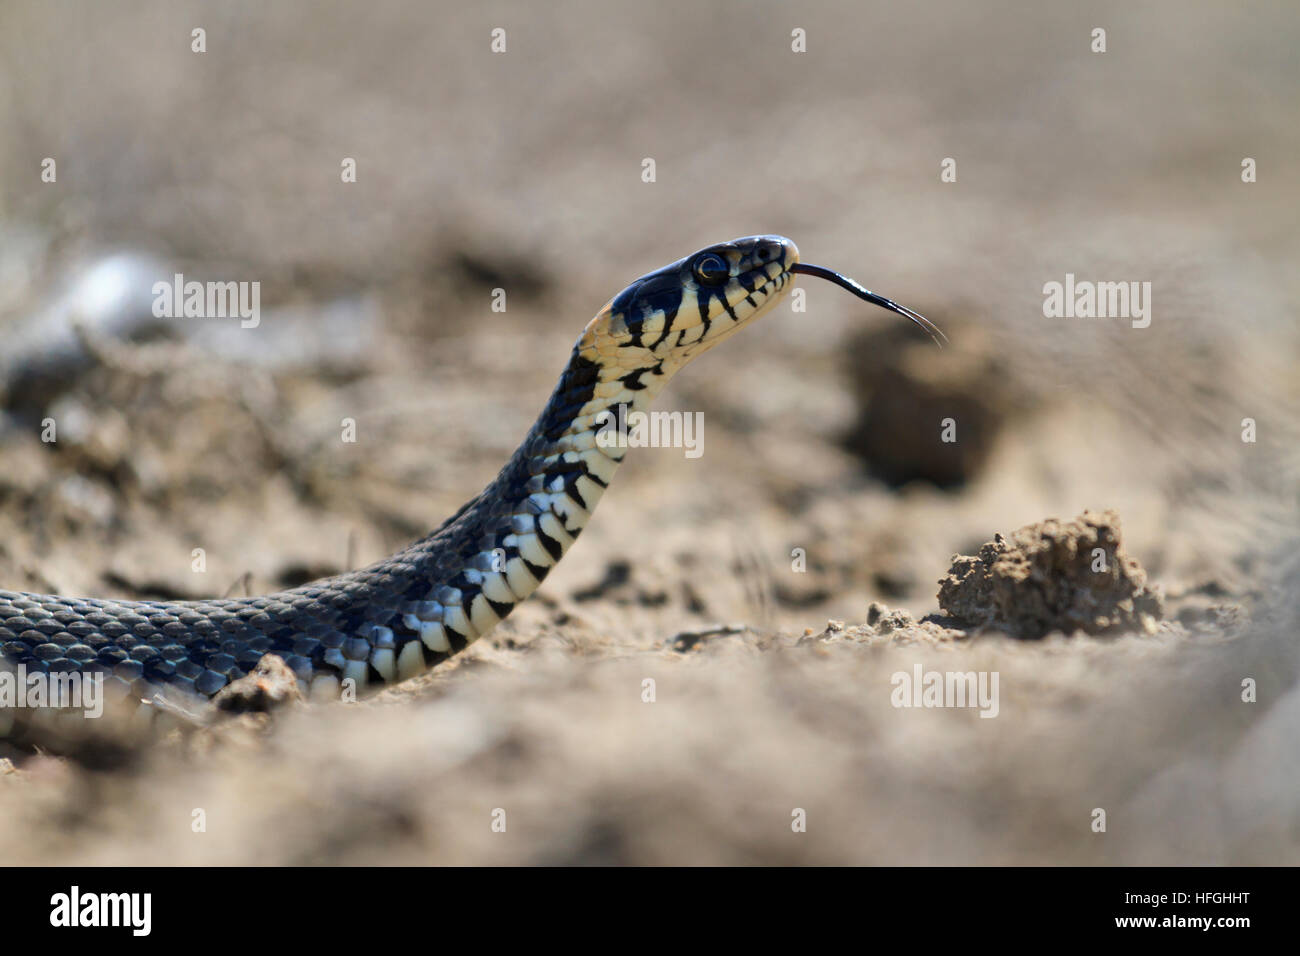 snake with protruding tongue crawling on sand,summer, snake, cold-blooded, reptiles Stock Photo